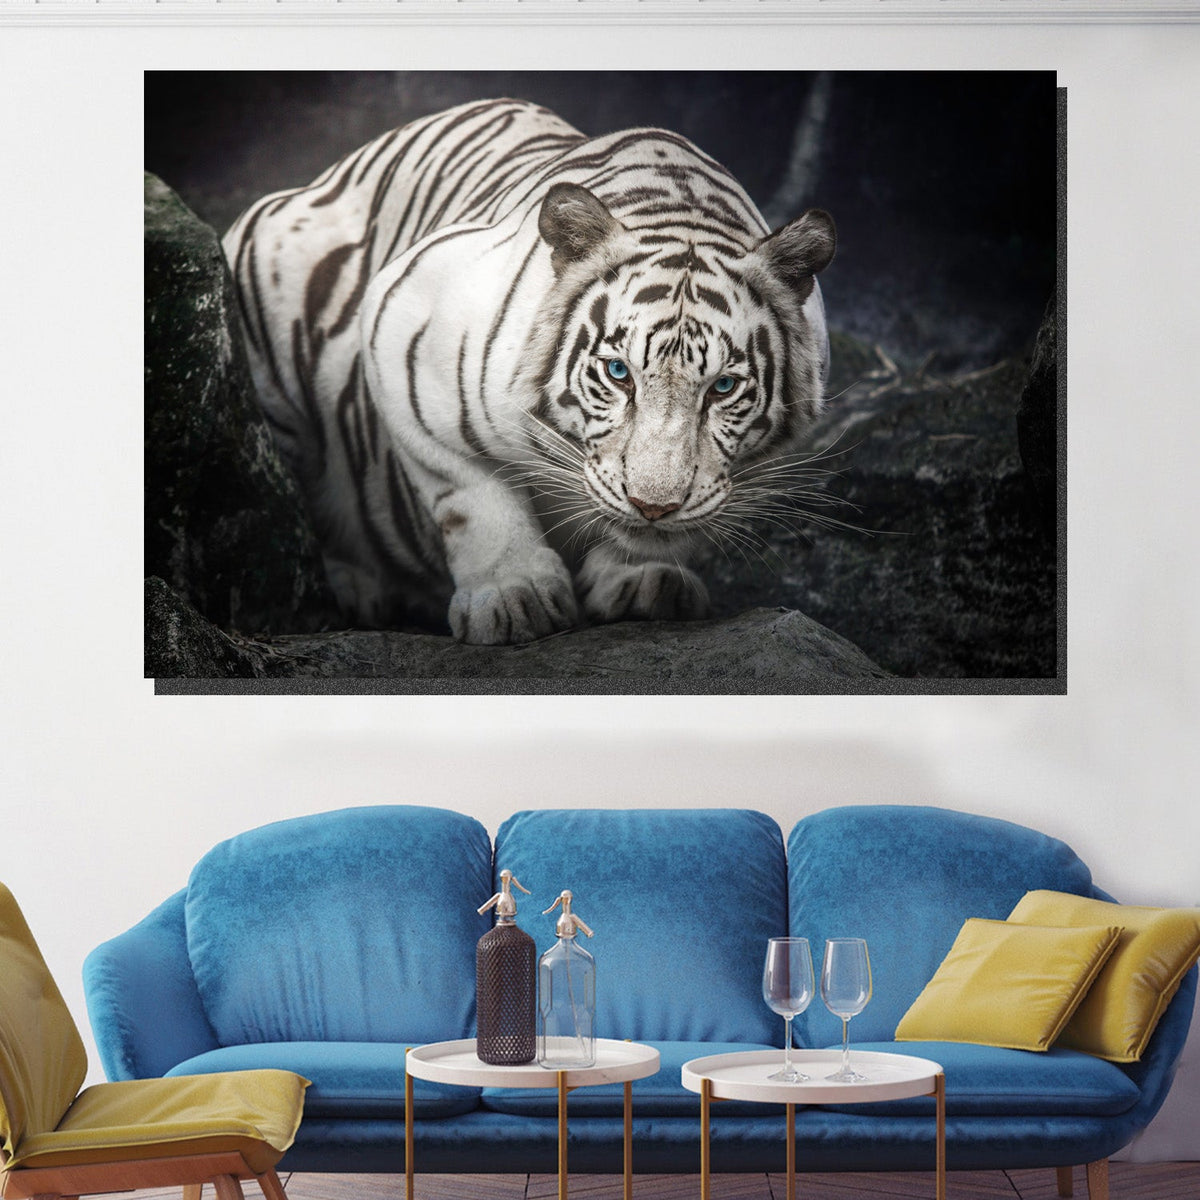 https://cdn.shopify.com/s/files/1/0387/9986/8044/products/CrouchingTigerCanvasArtprintStretched-2.jpg